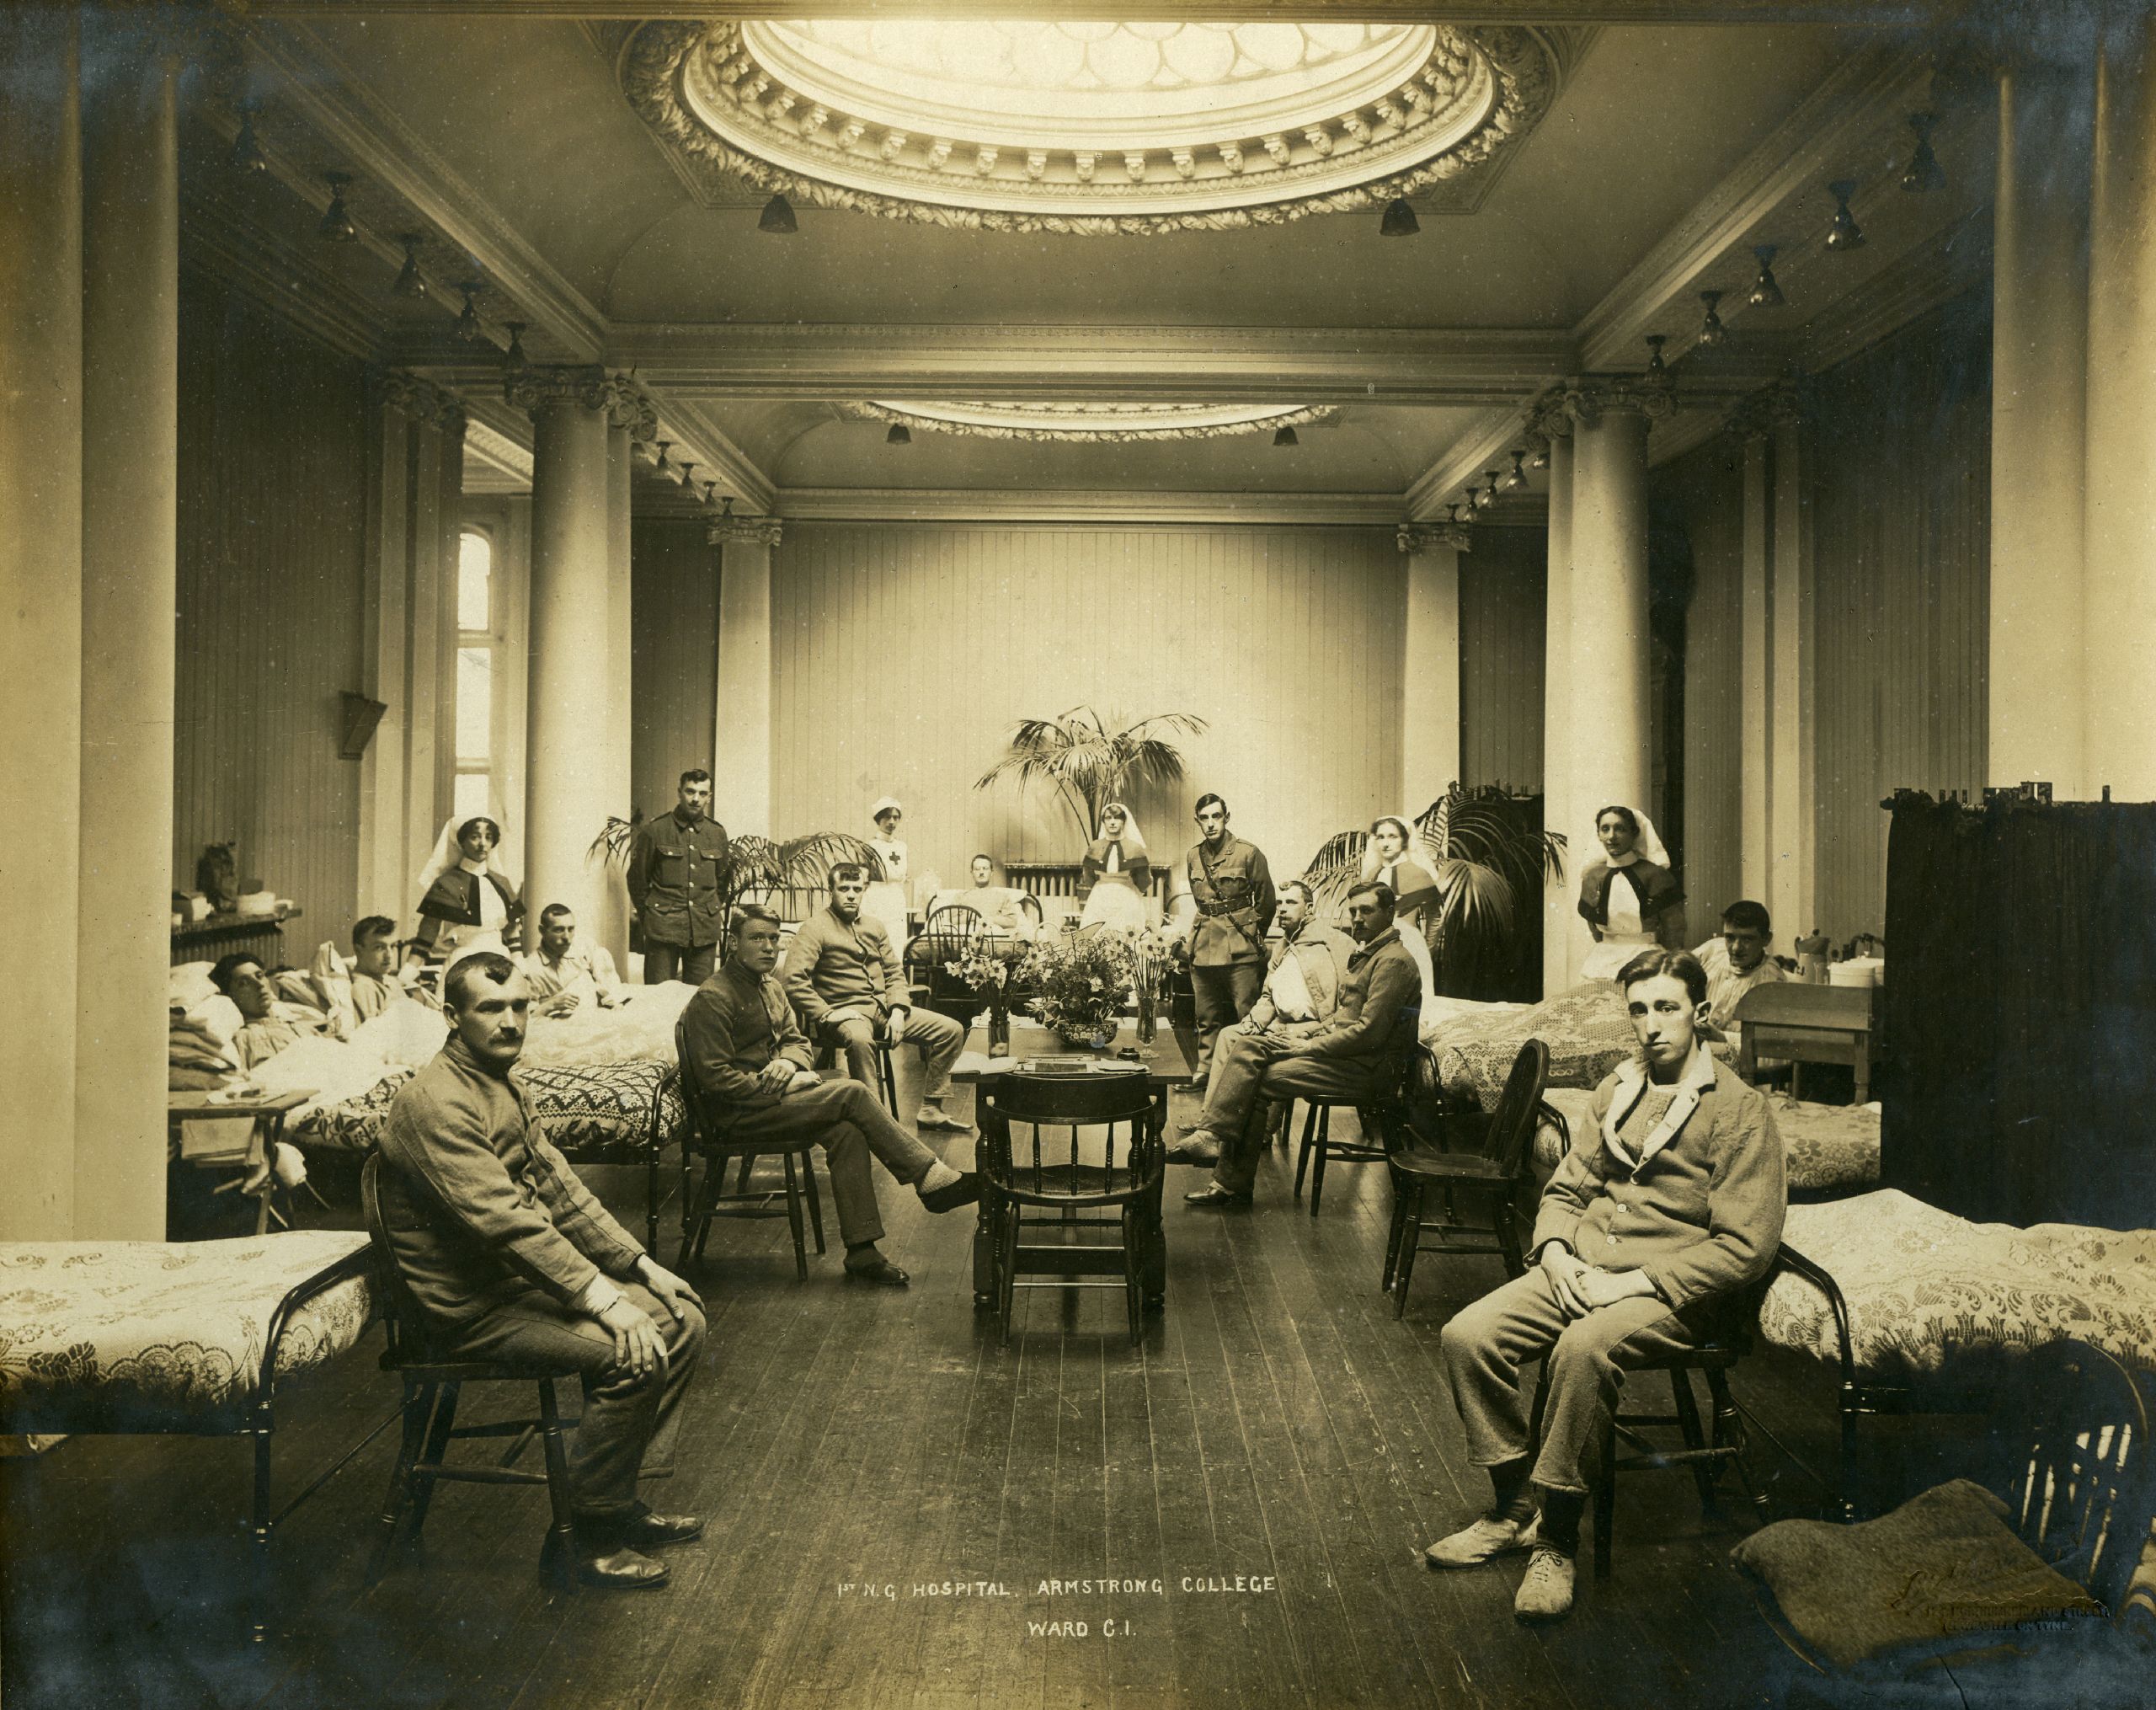 Photograph of wounded servicemen and staff on Ward C1 of the First Northern General Hospital